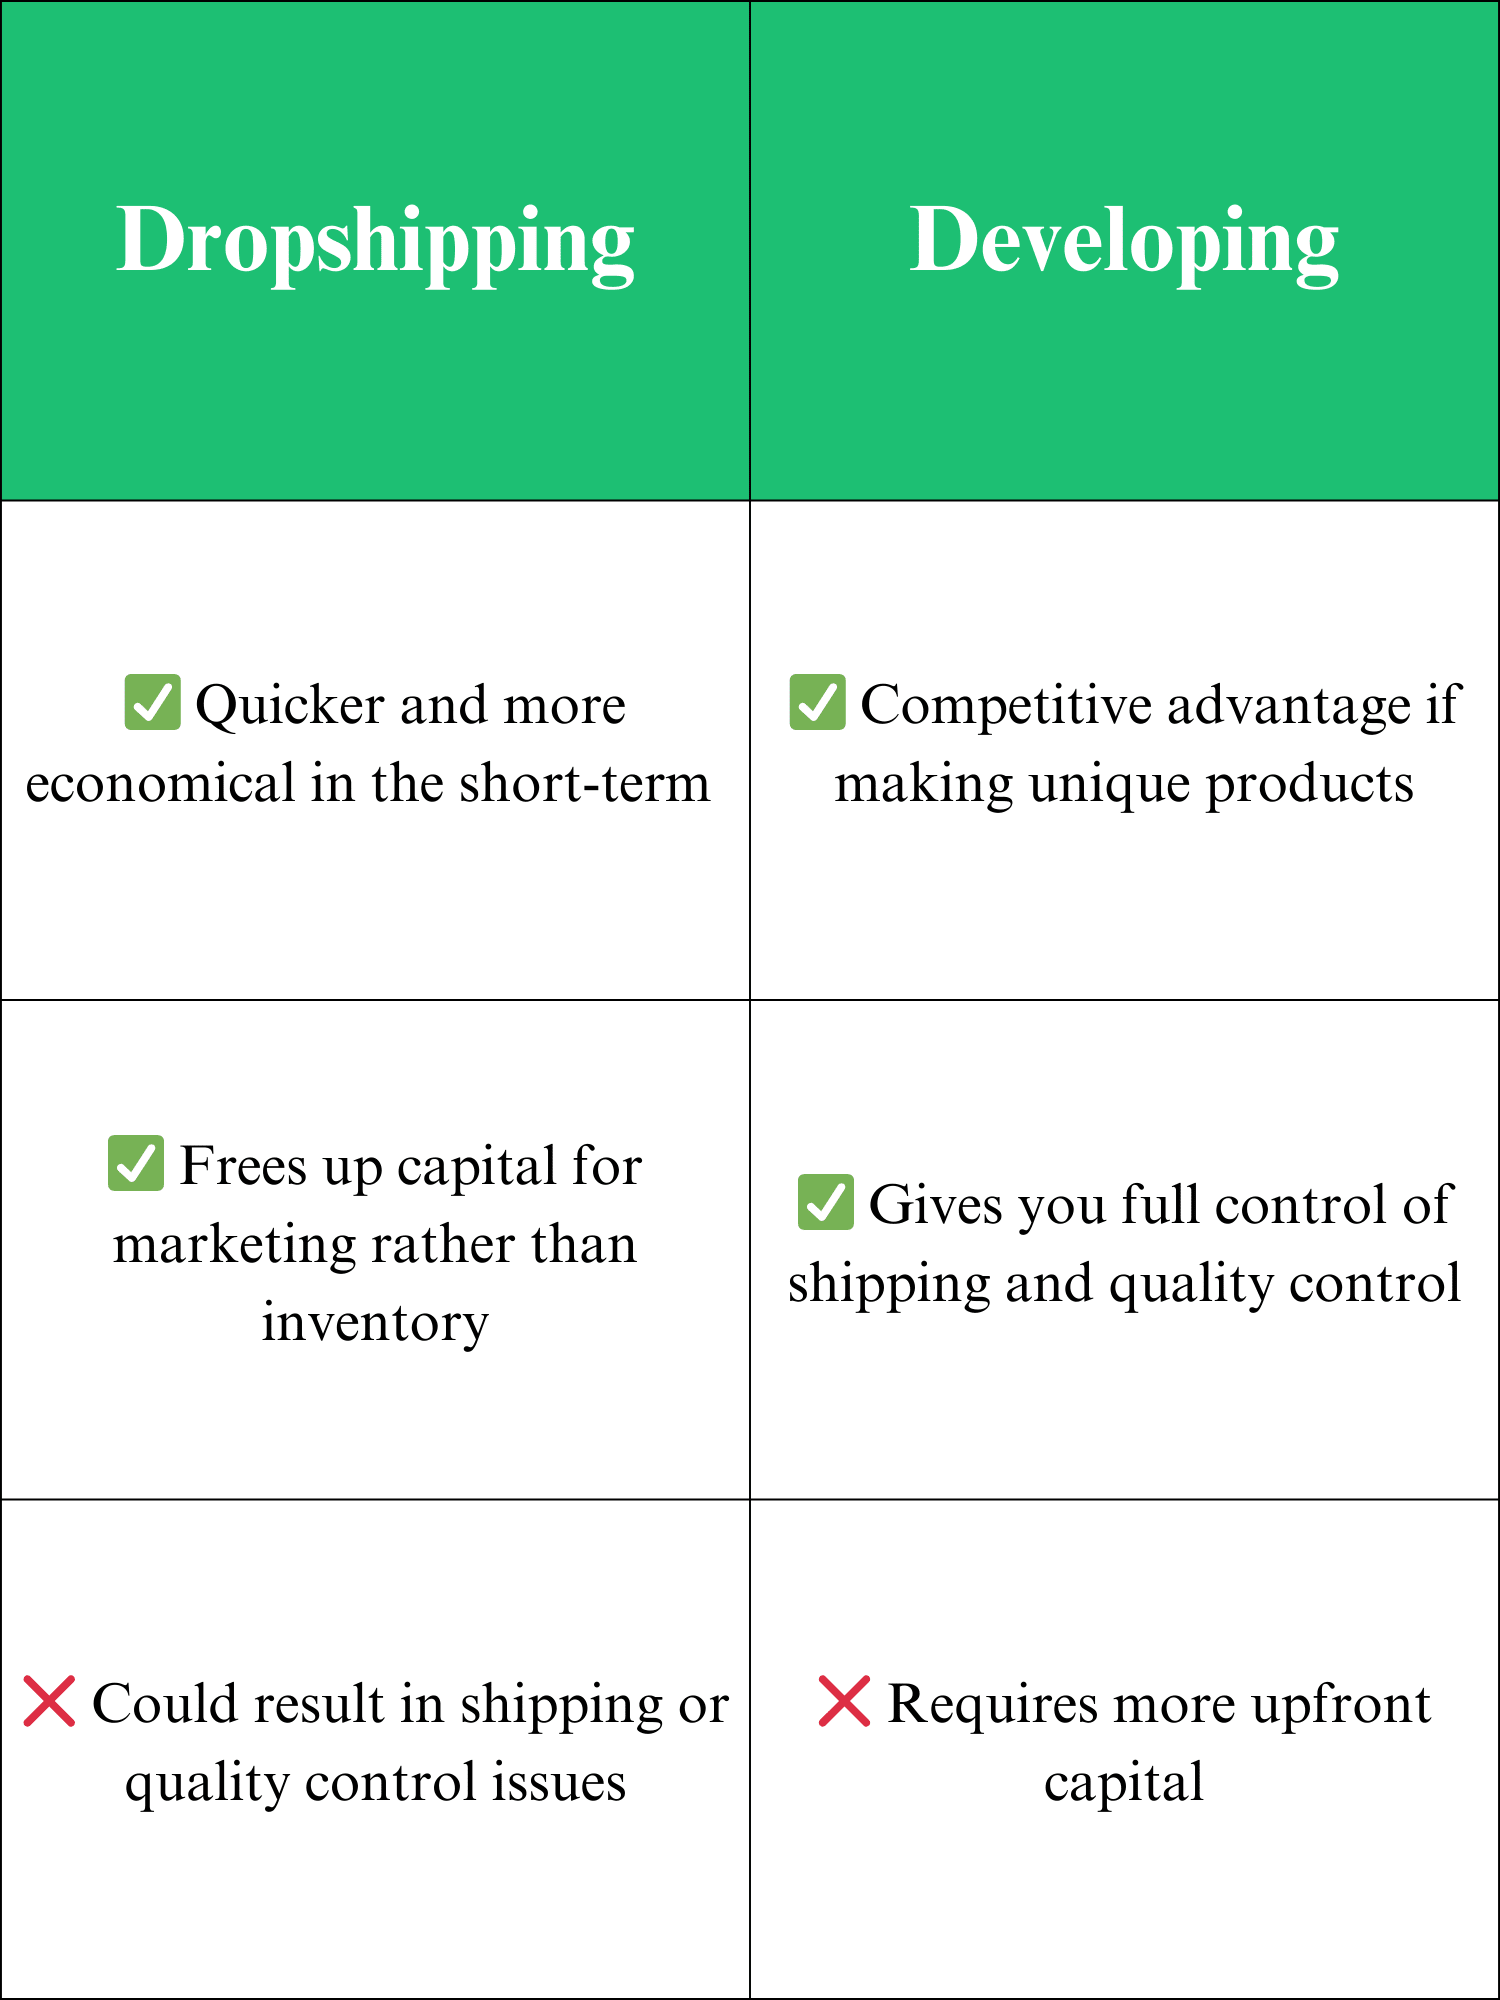 Pros and cons list of dropshipping versus developing products.